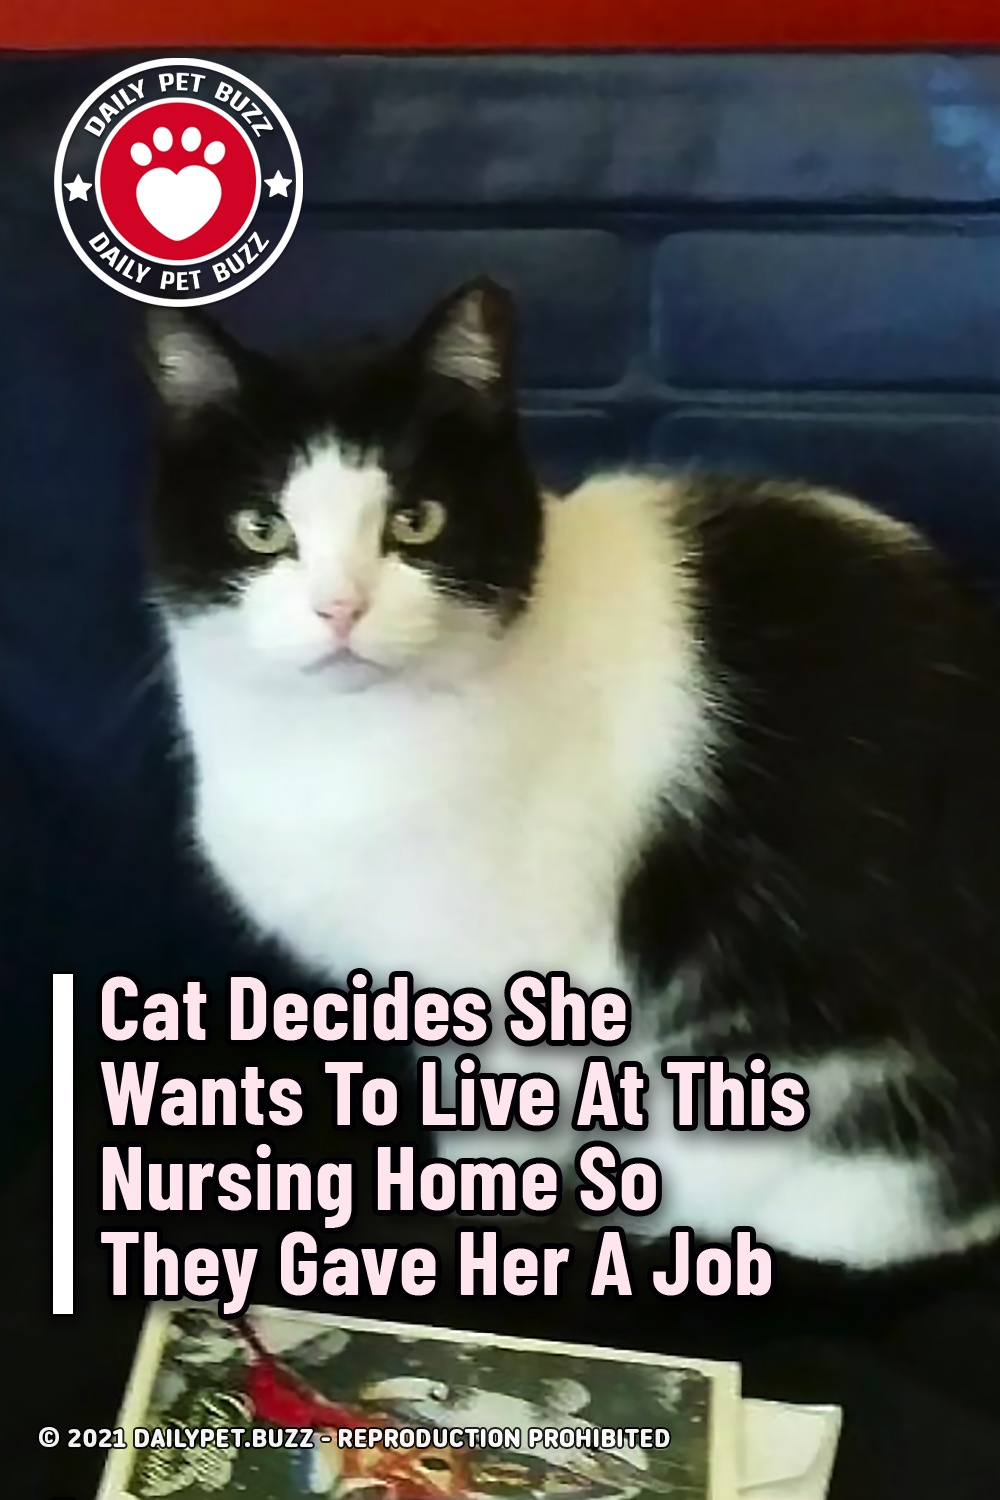 Cat Decides She Wants To Live At This Nursing Home So They Gave Her A Job